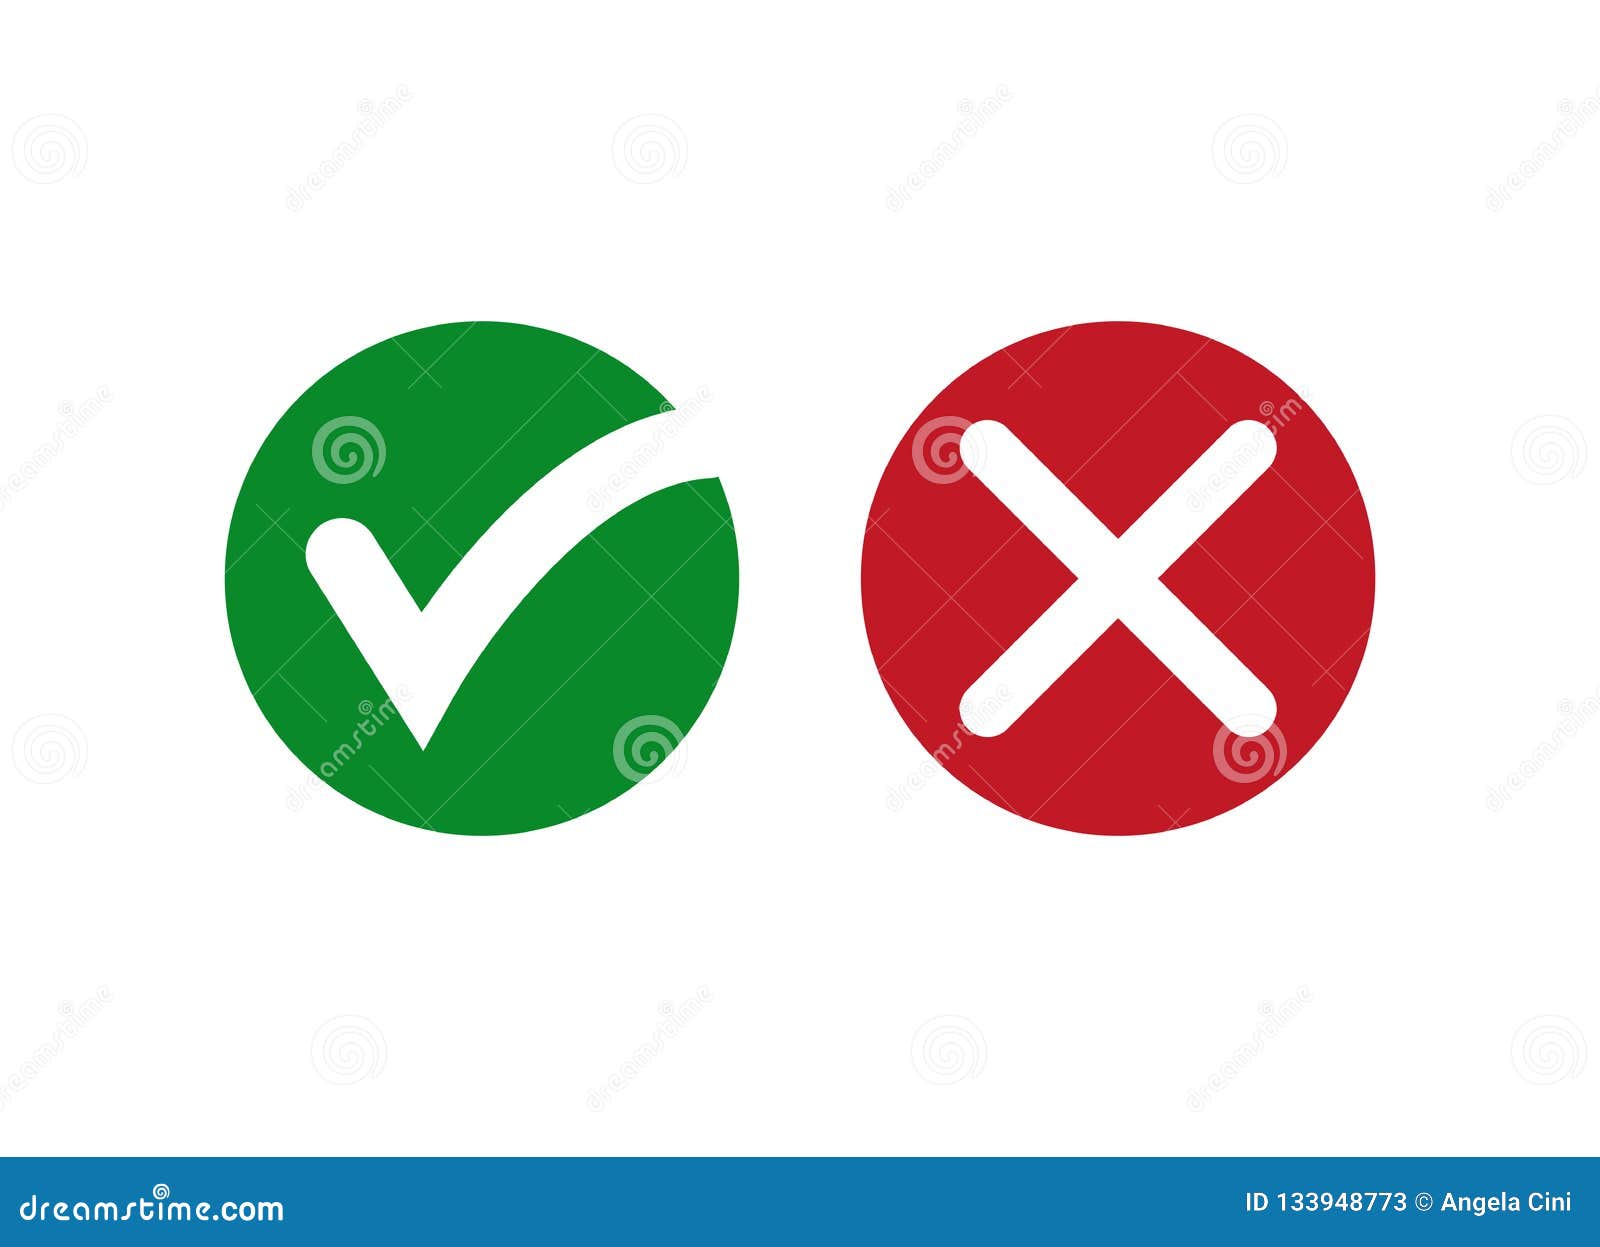 checkmark, x, yes and no or confirm and deny icon